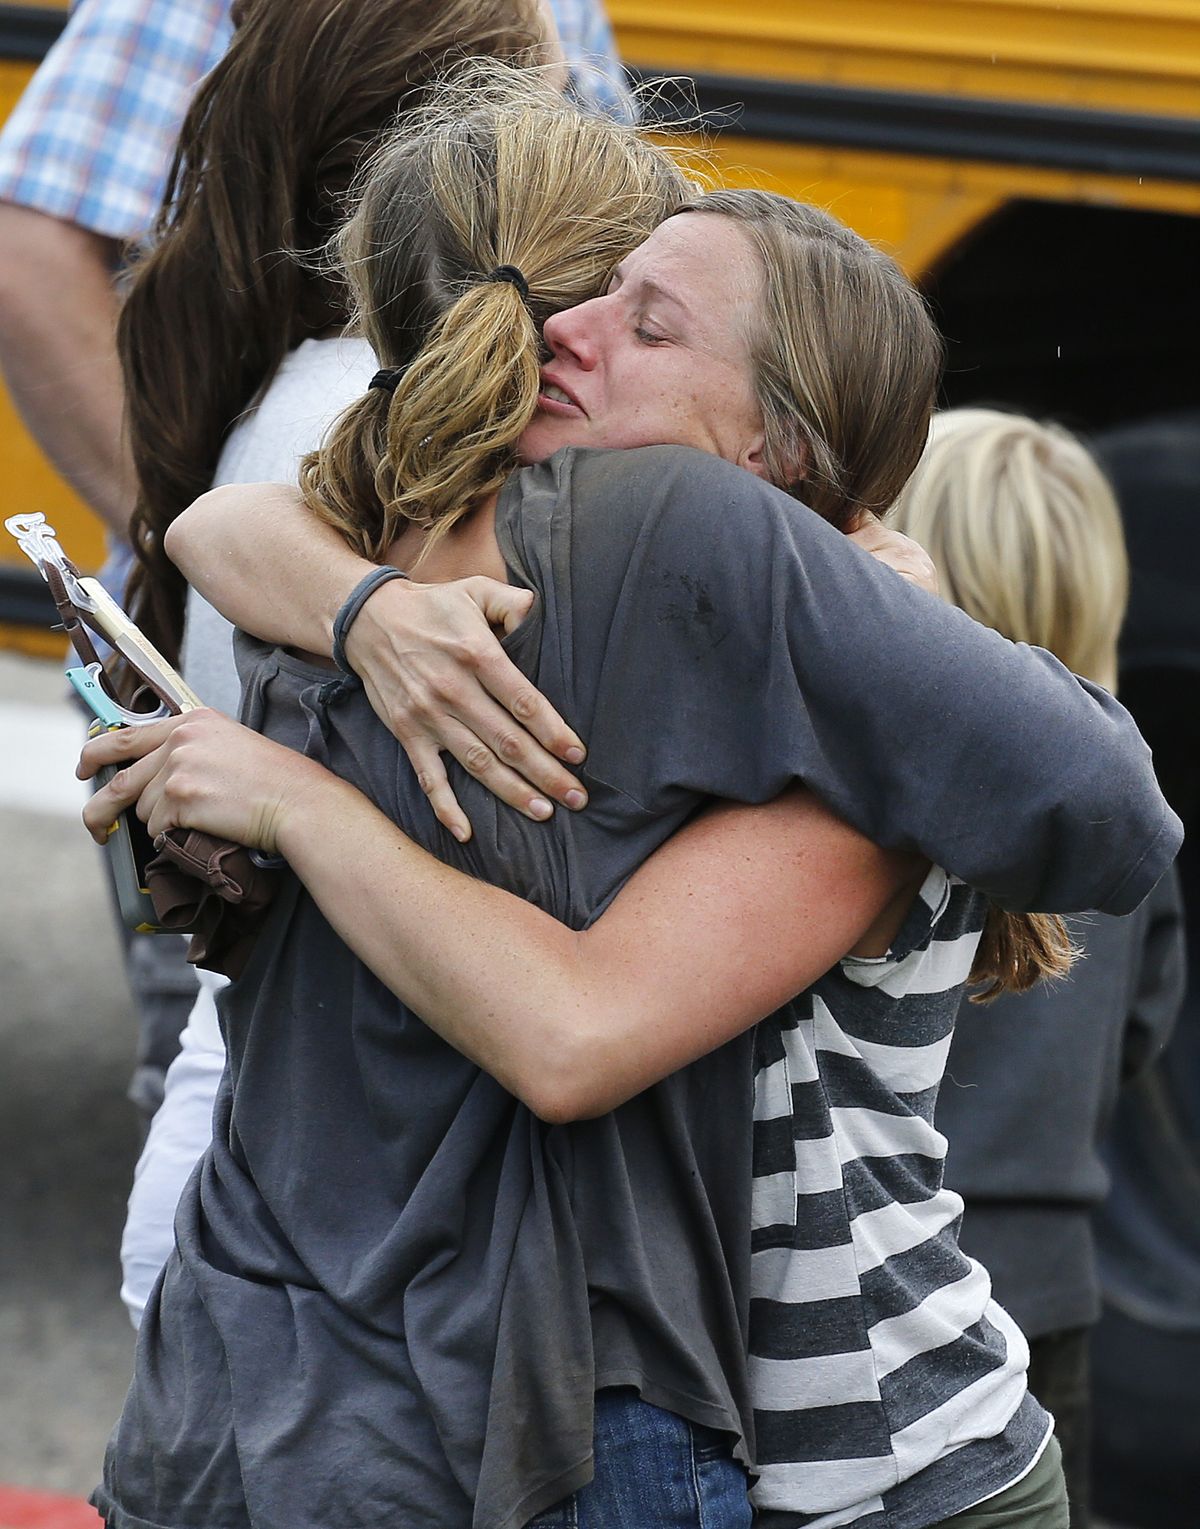 Evacuees embrace Saturday at a drop-off point for those rescued after days of flooding, at a high school in Niwot, Colo. (Associated Press)